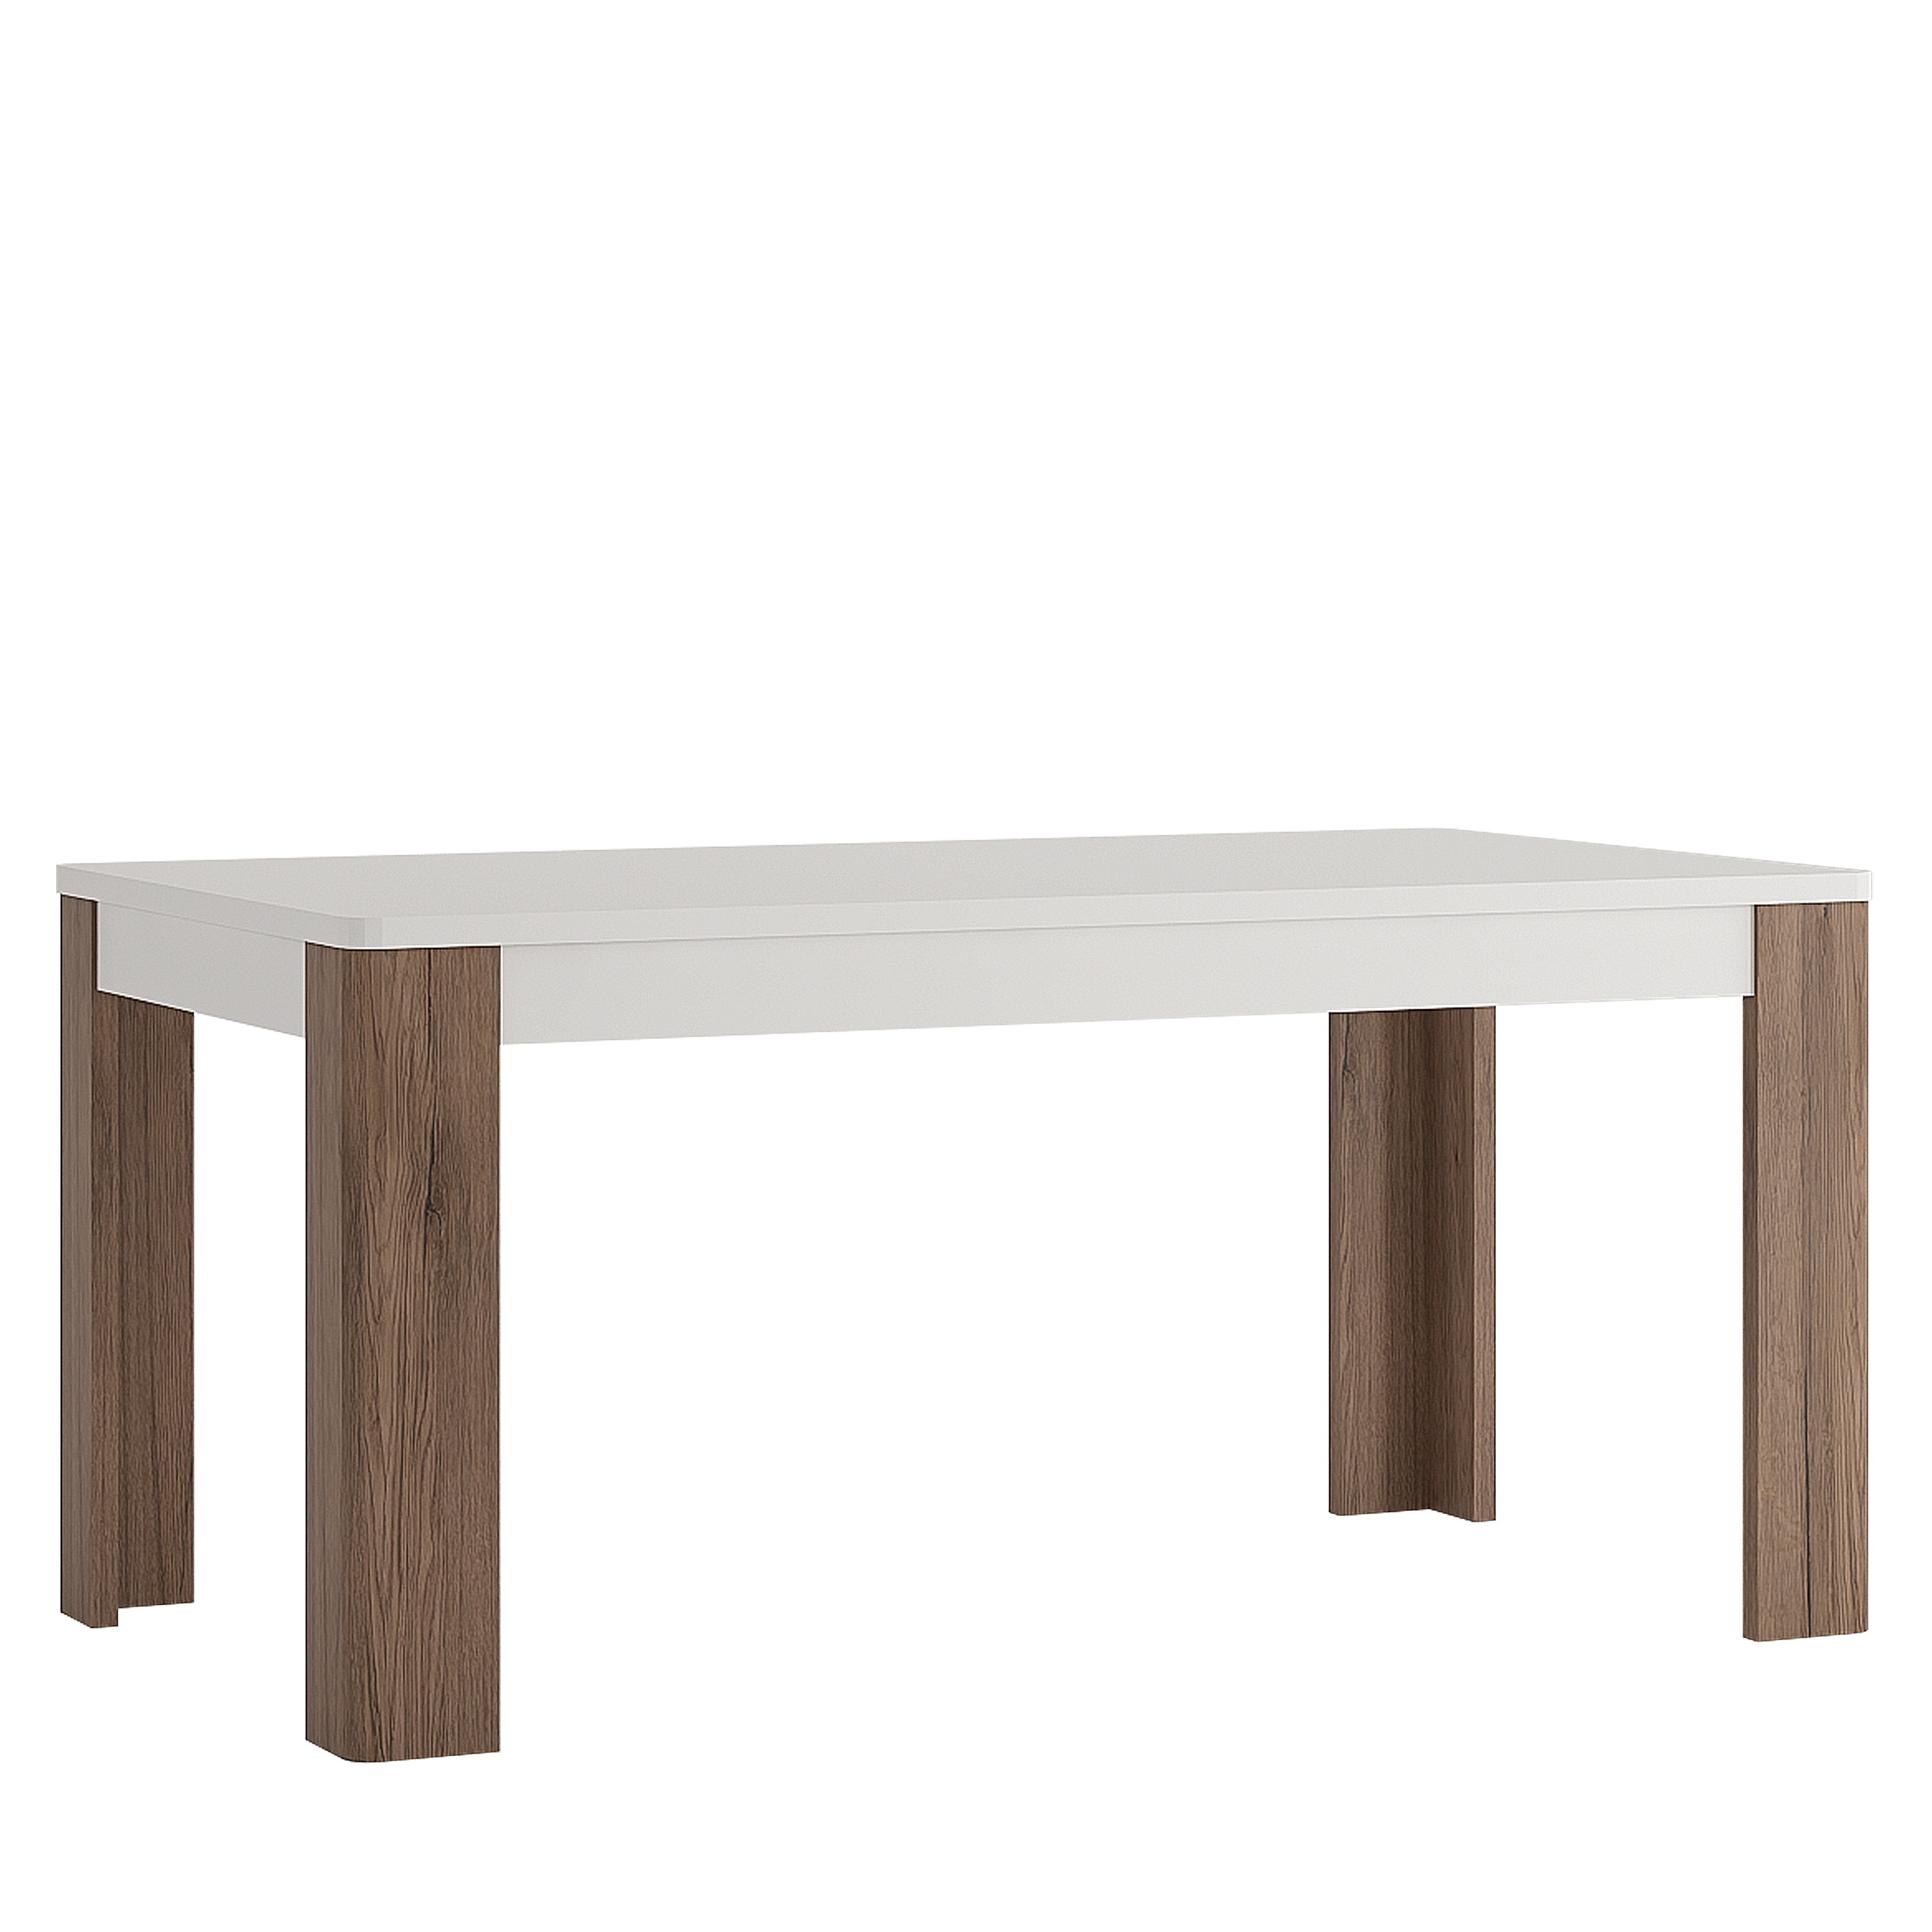 Image of Toronto Dining Table